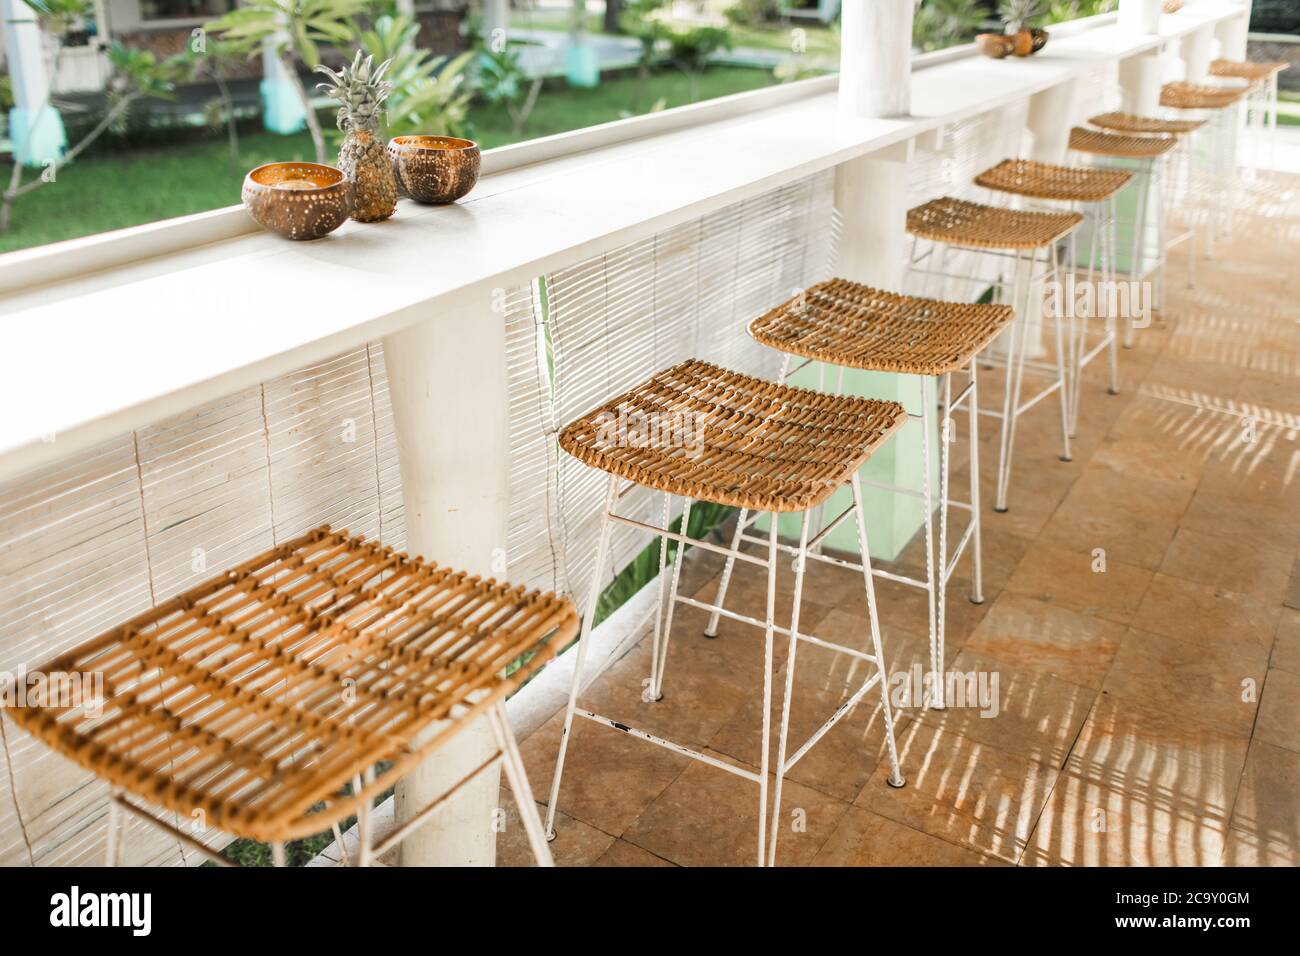 Wicker rattan chairs on bar counter. Trendy furniture design. Summer cafe terrace. Stock Photo